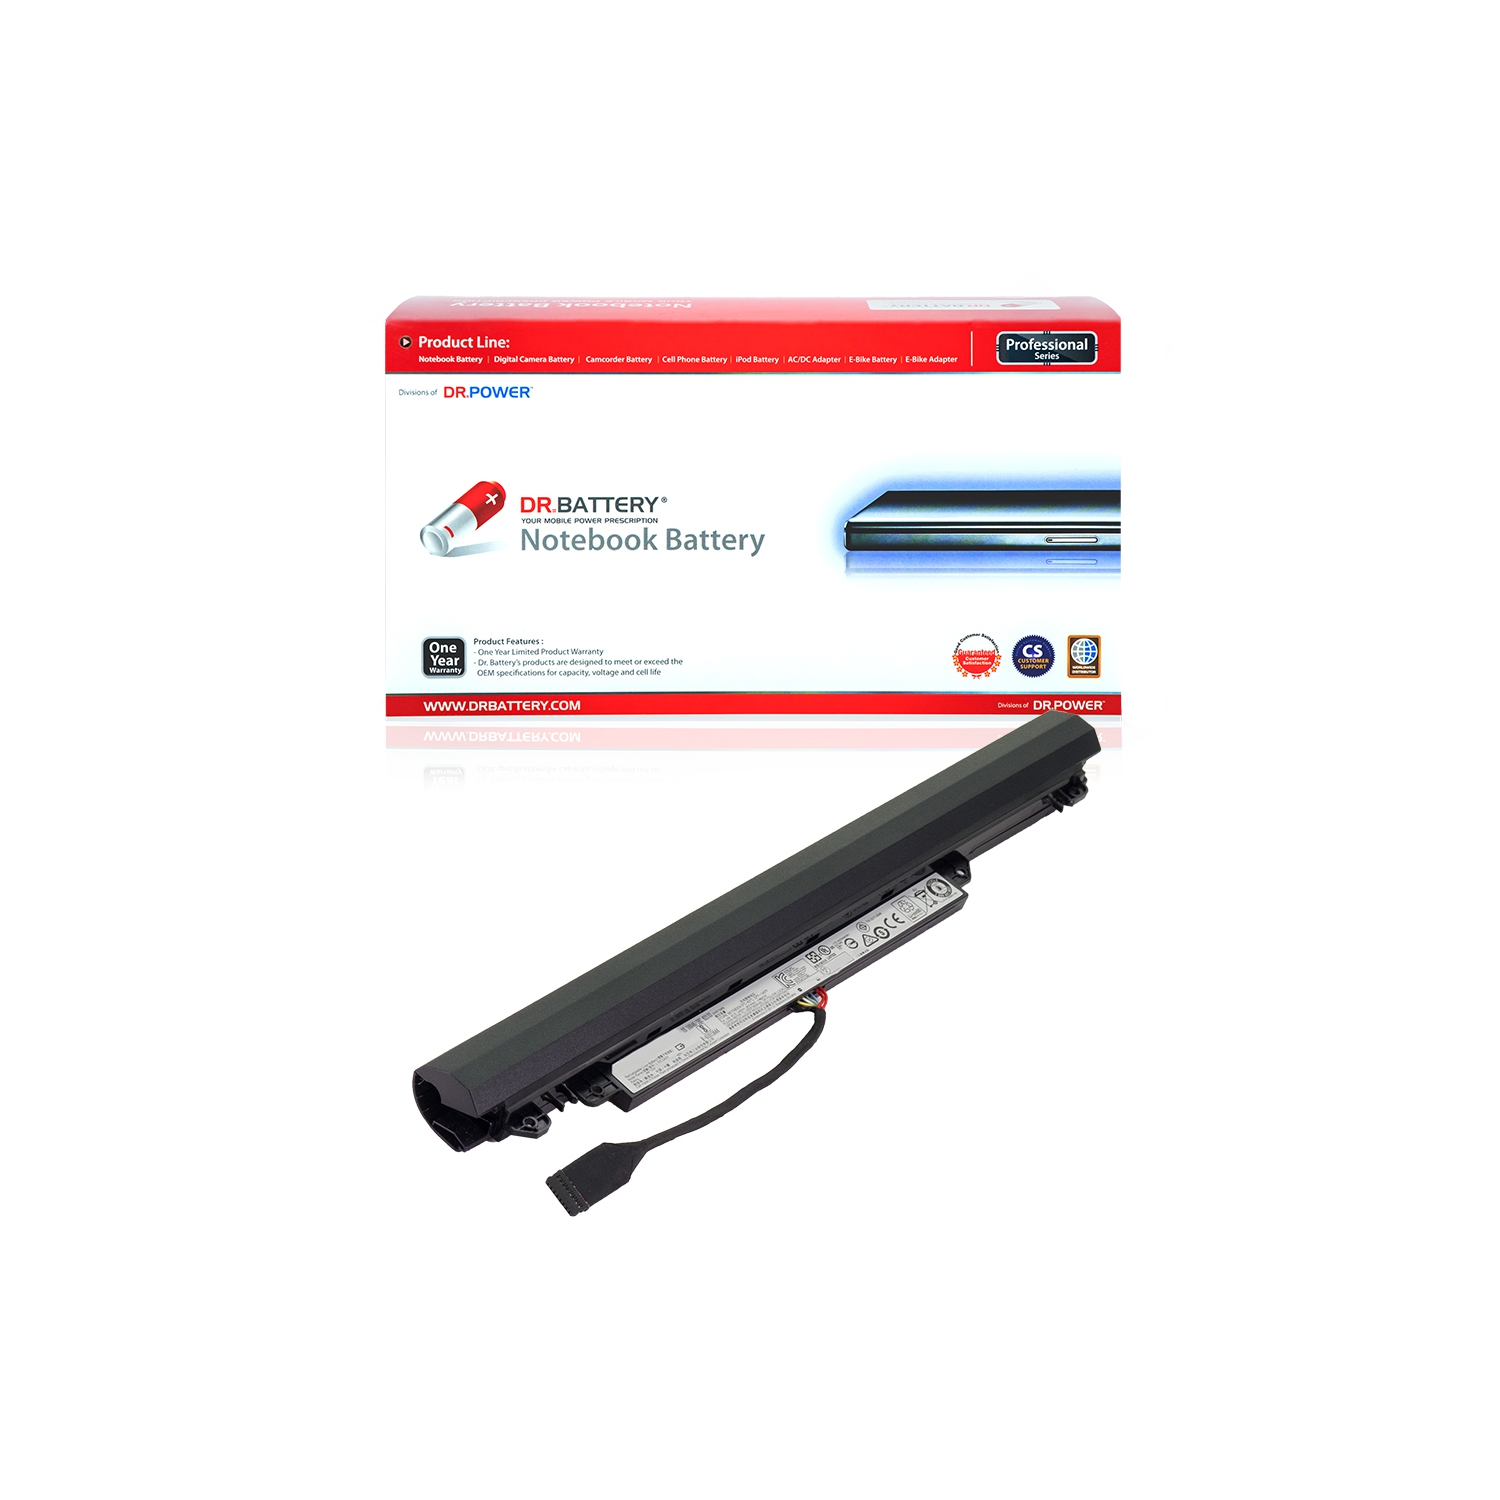 DR. BATTERY - Replacement for Lenovo IdeaPad 110-15IBR 80T7002NCF / 110-15IBR 80T7002PCF / L15C3A03 / L15S3A02 / 5B10L04166